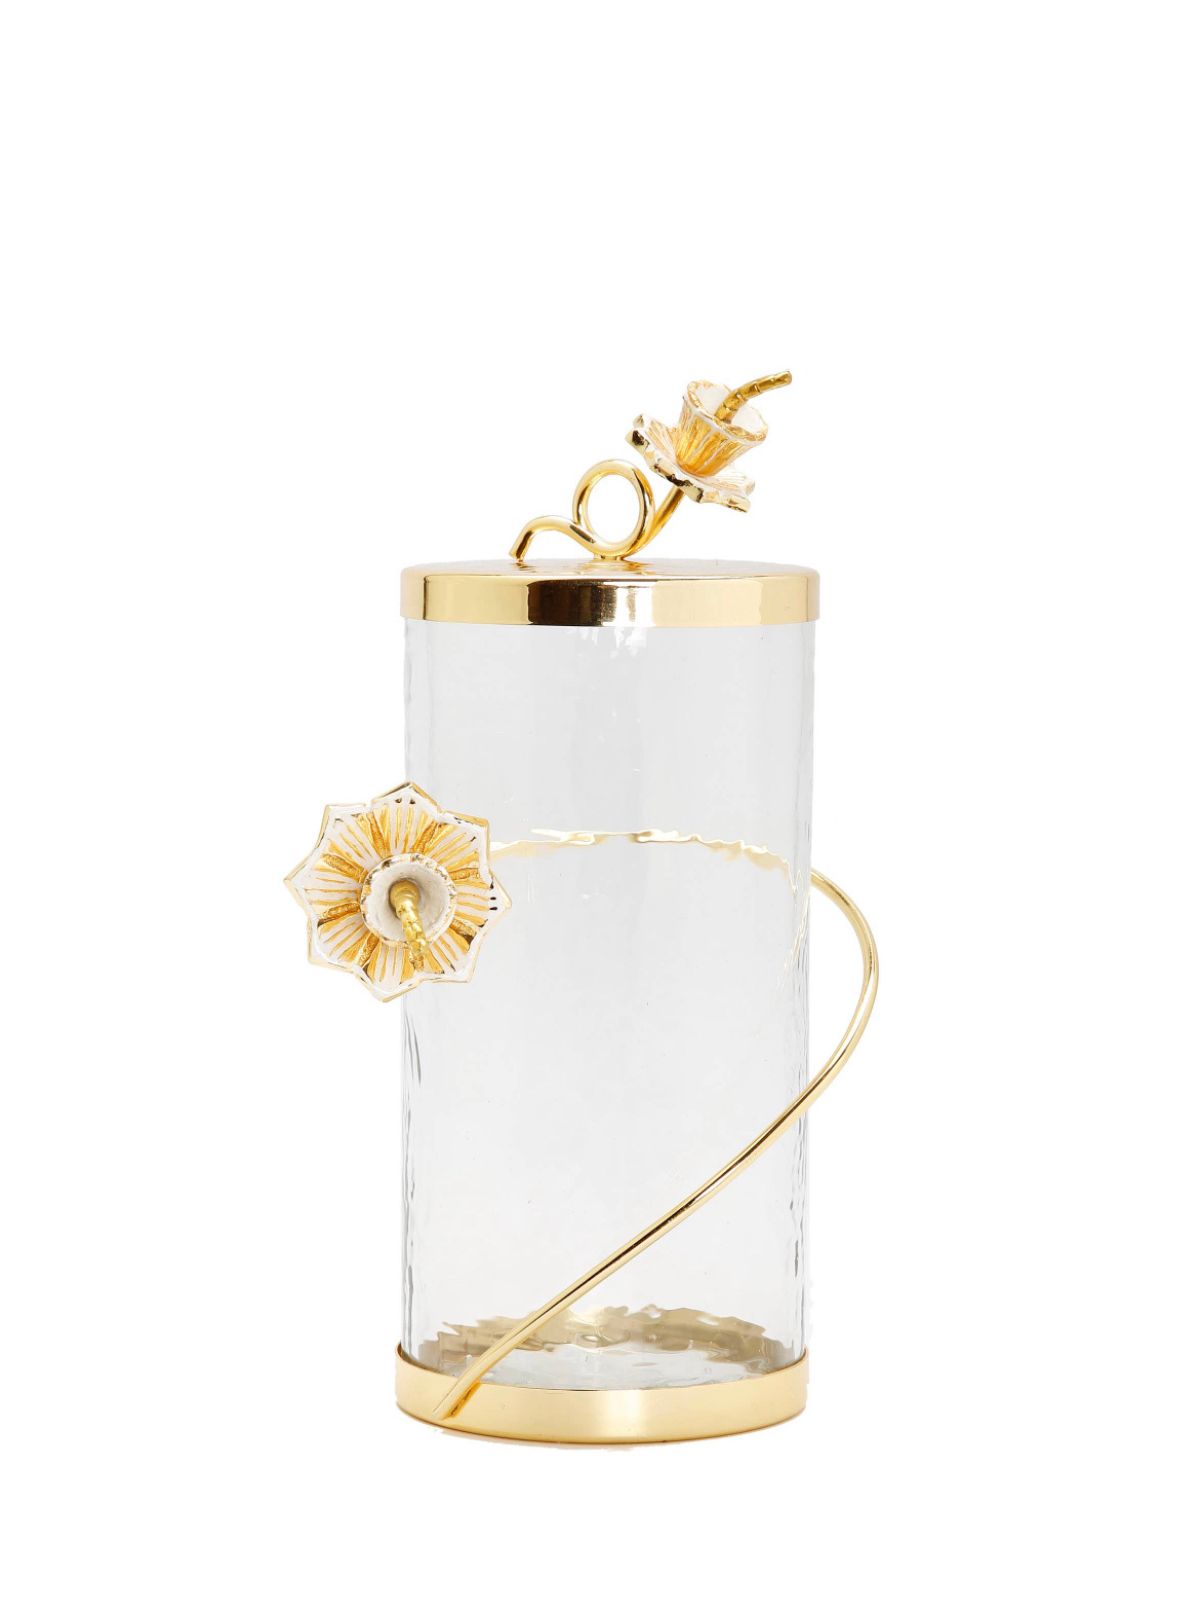 The Rose of Sharon Glass Canister with Gold Lid and  Enamel Flower Design on Knob has an elegant and decorous design.